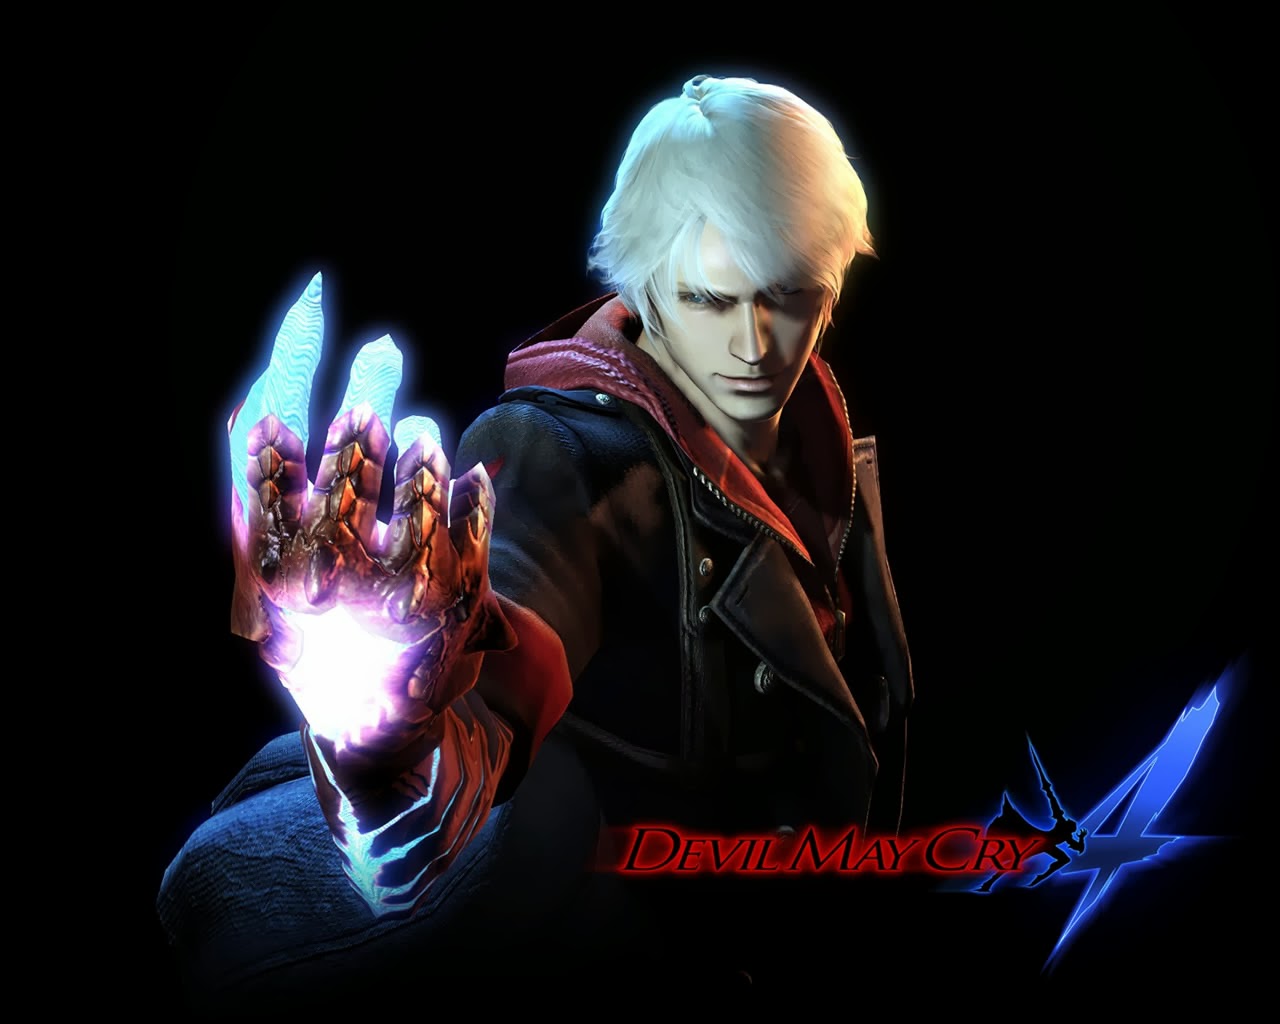 Download devil may cry 4 479 mb